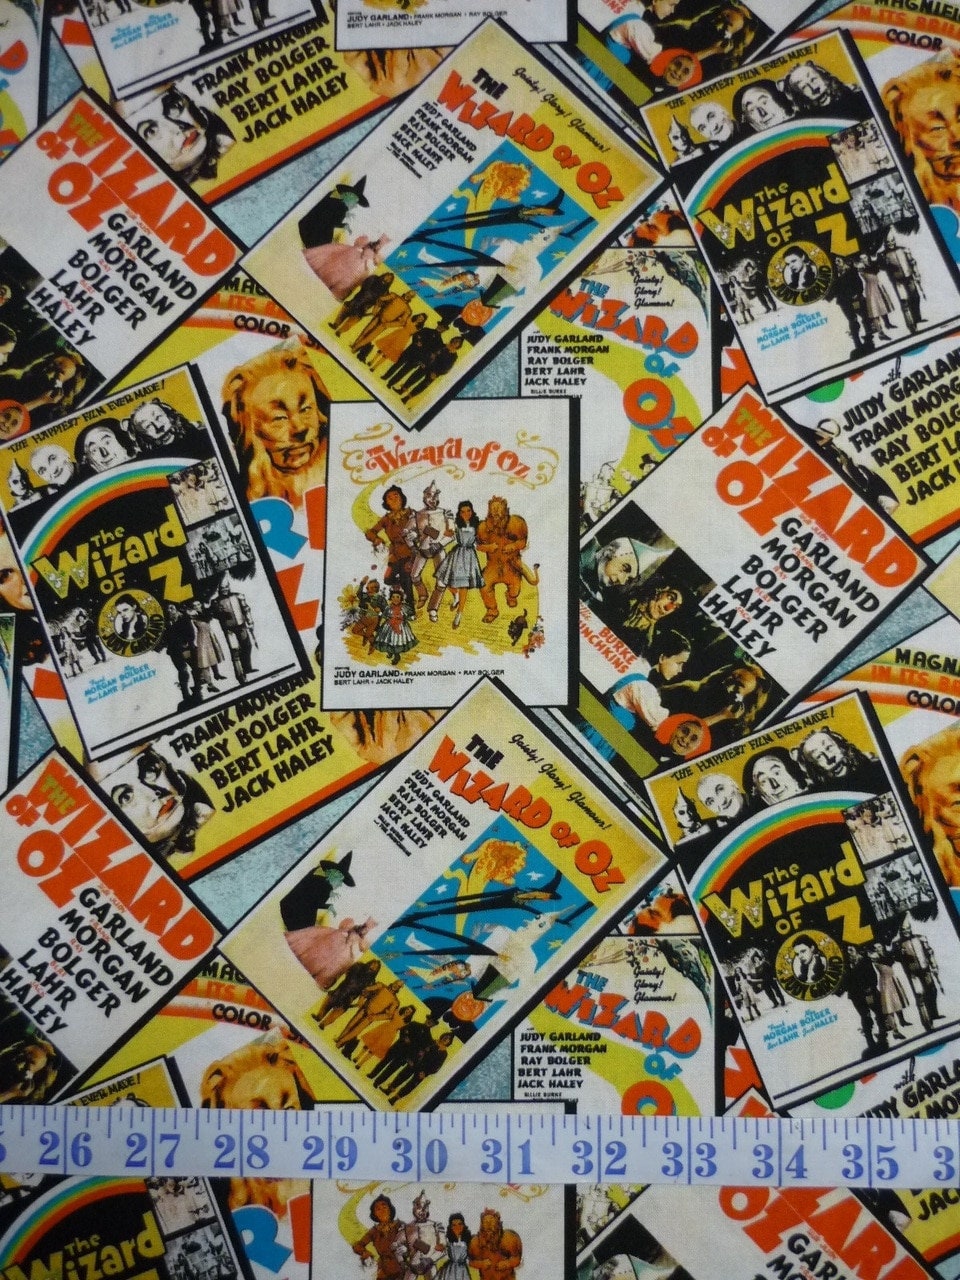 Wizard of OZ Vintage Art Print Jigsaw Puzzle for Sale by posterbobs